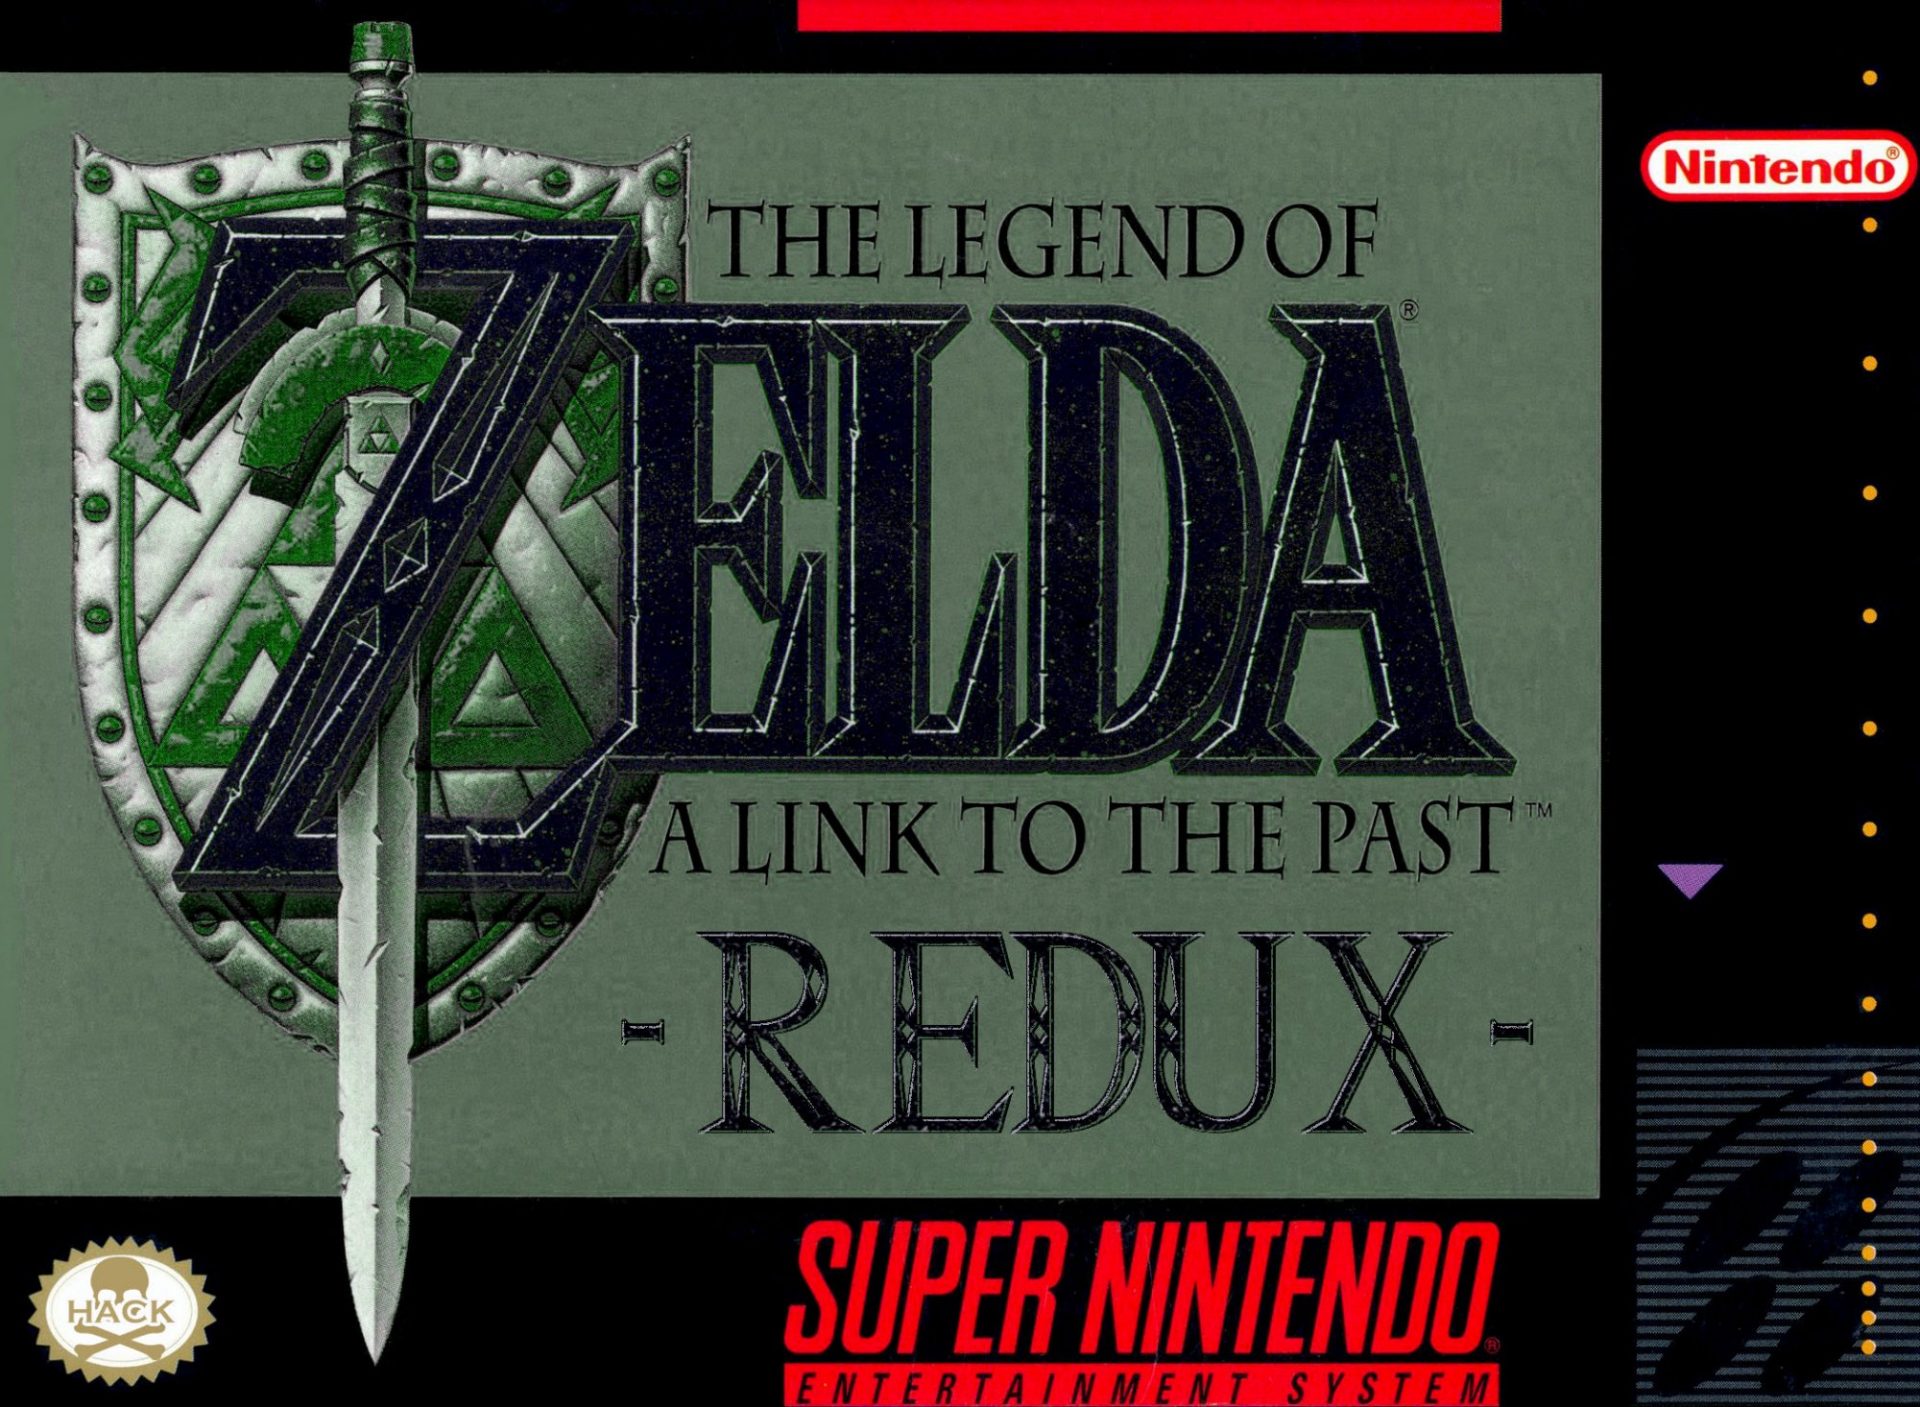 A Link to the Past Redux scaled